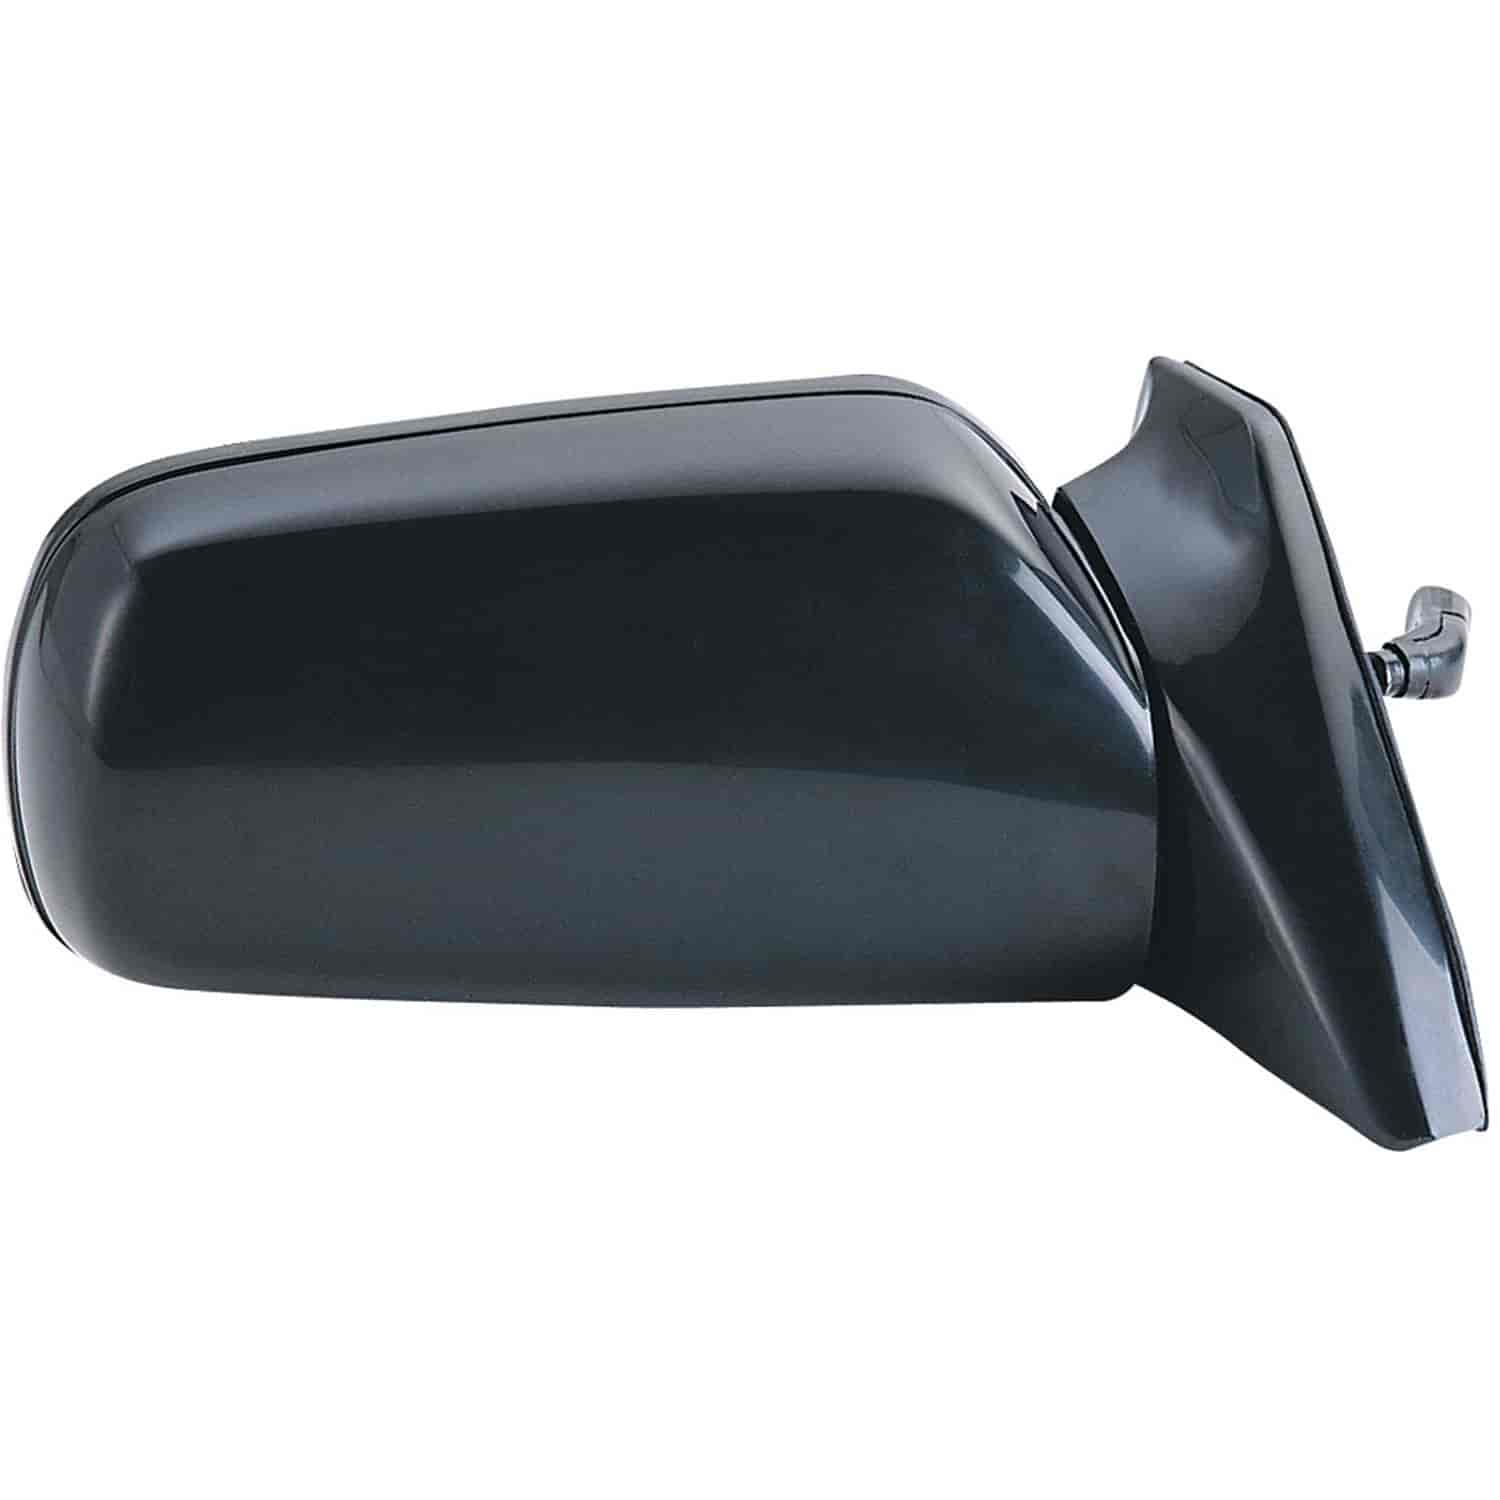 OEM Style Replacement mirror for 86-87 Mazda 323 passenger side mirror tested to fit and function li